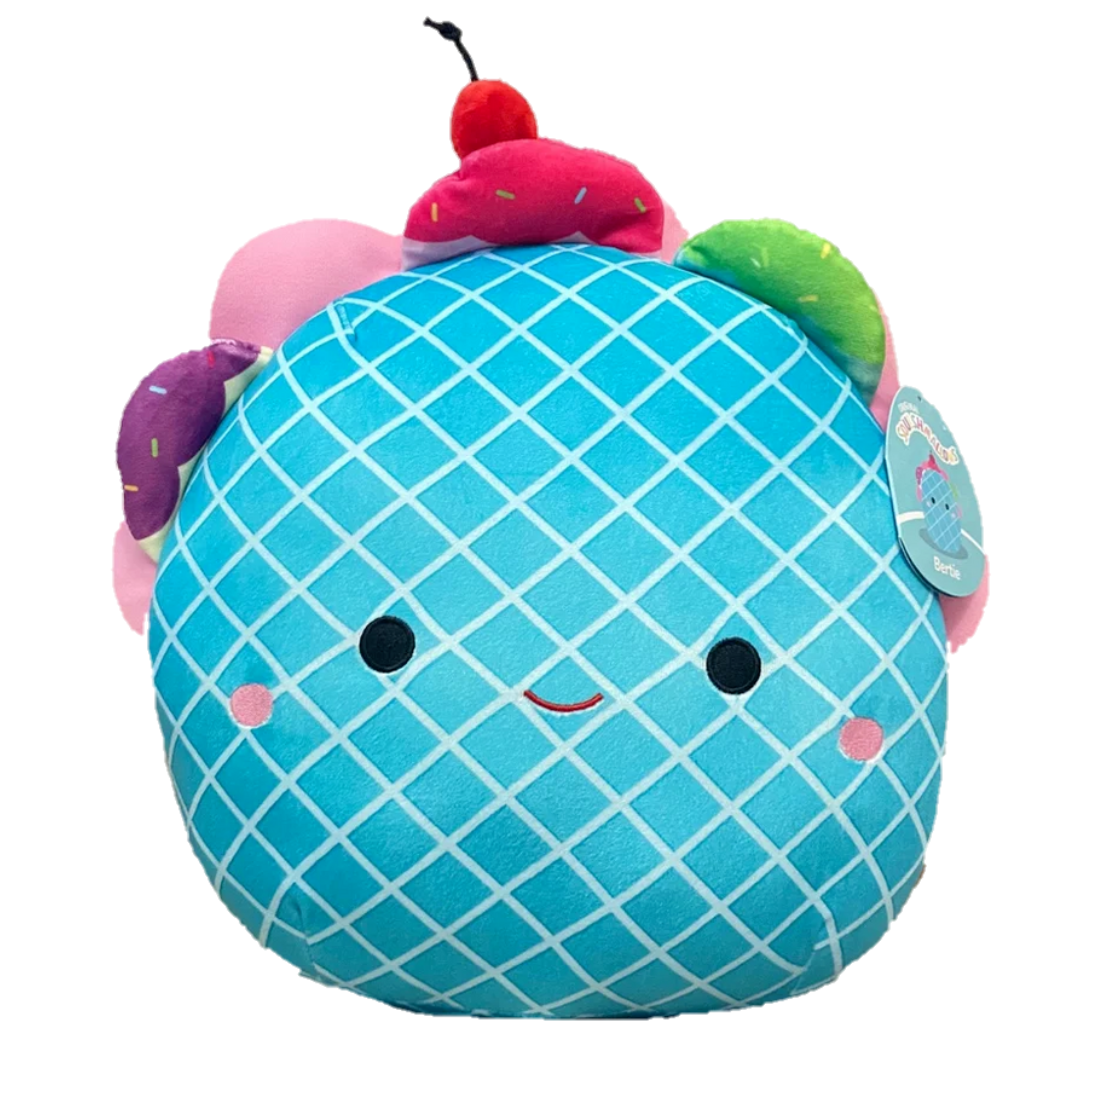 https://static.wikia.nocookie.net/squishmallowsquad/images/5/59/Bertie.png/revision/latest?cb=20220731121402